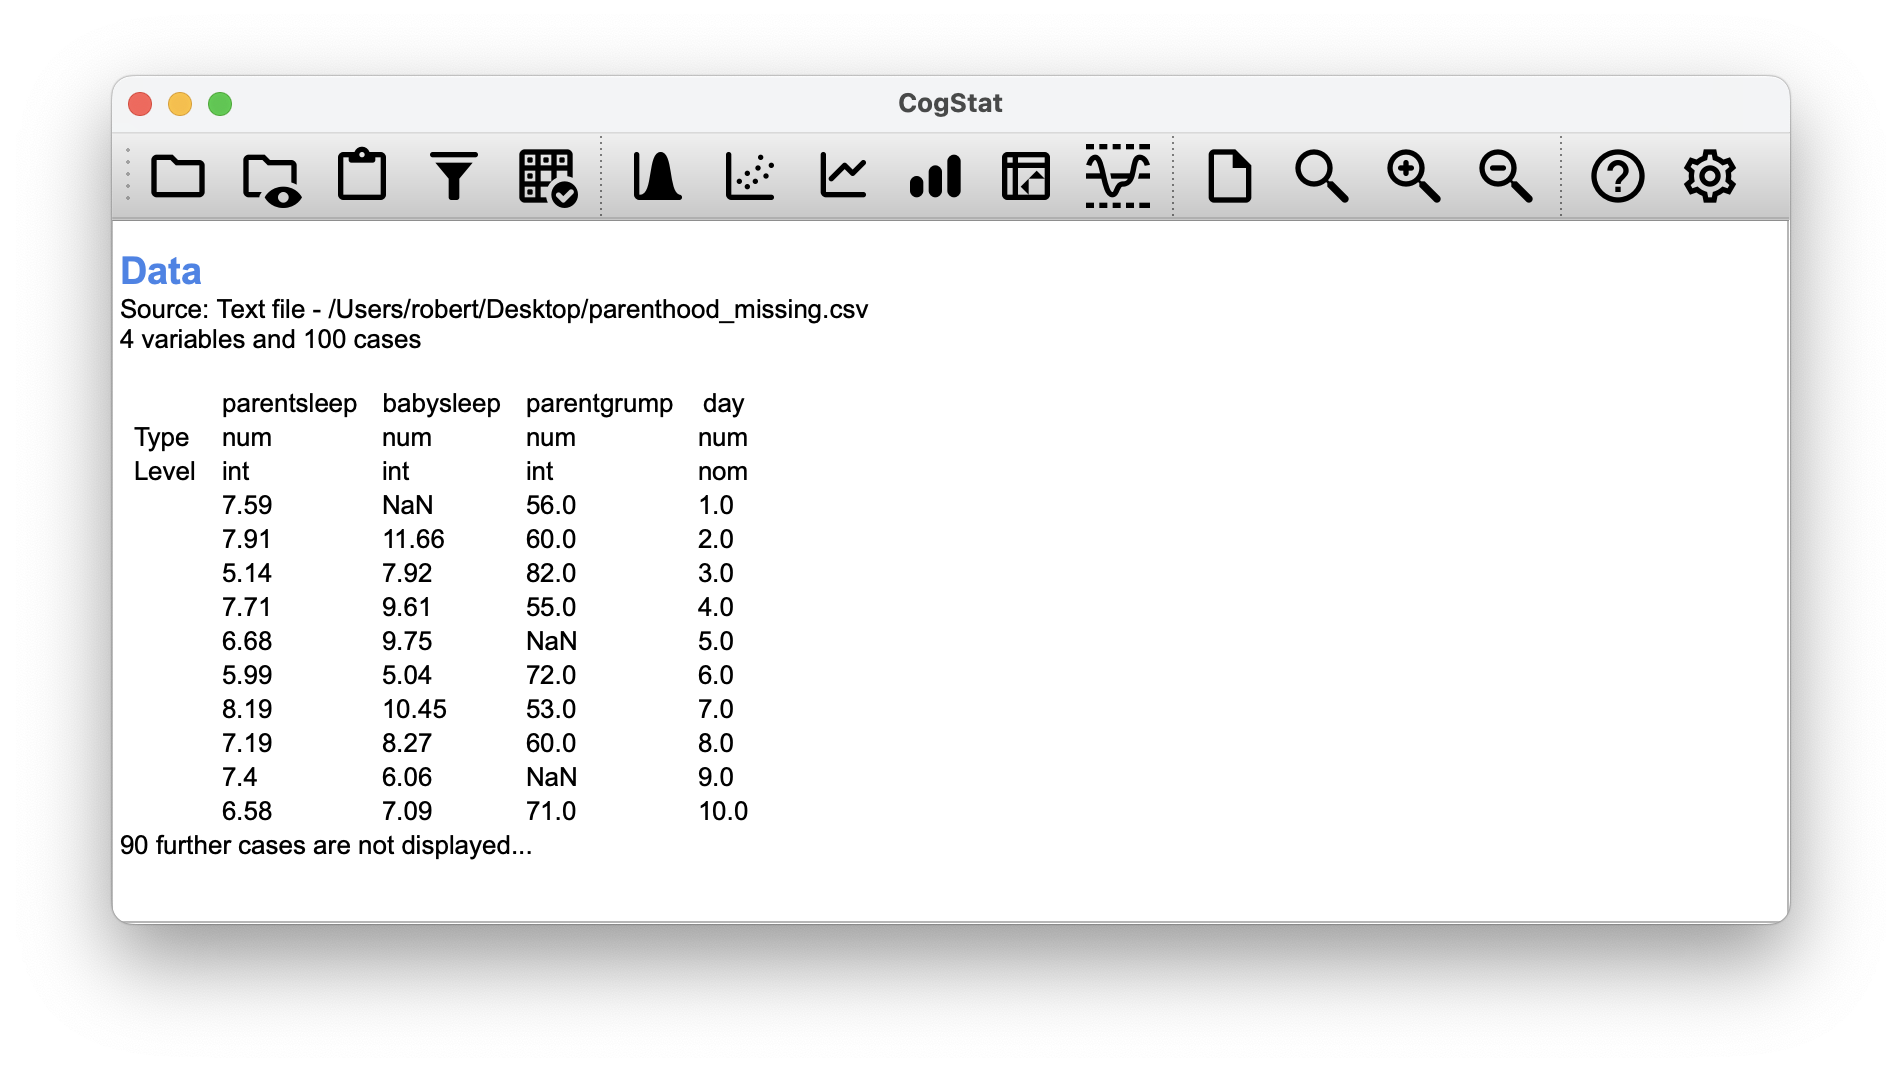 This is what you would see in CogStat after loading the adjusted dataset.